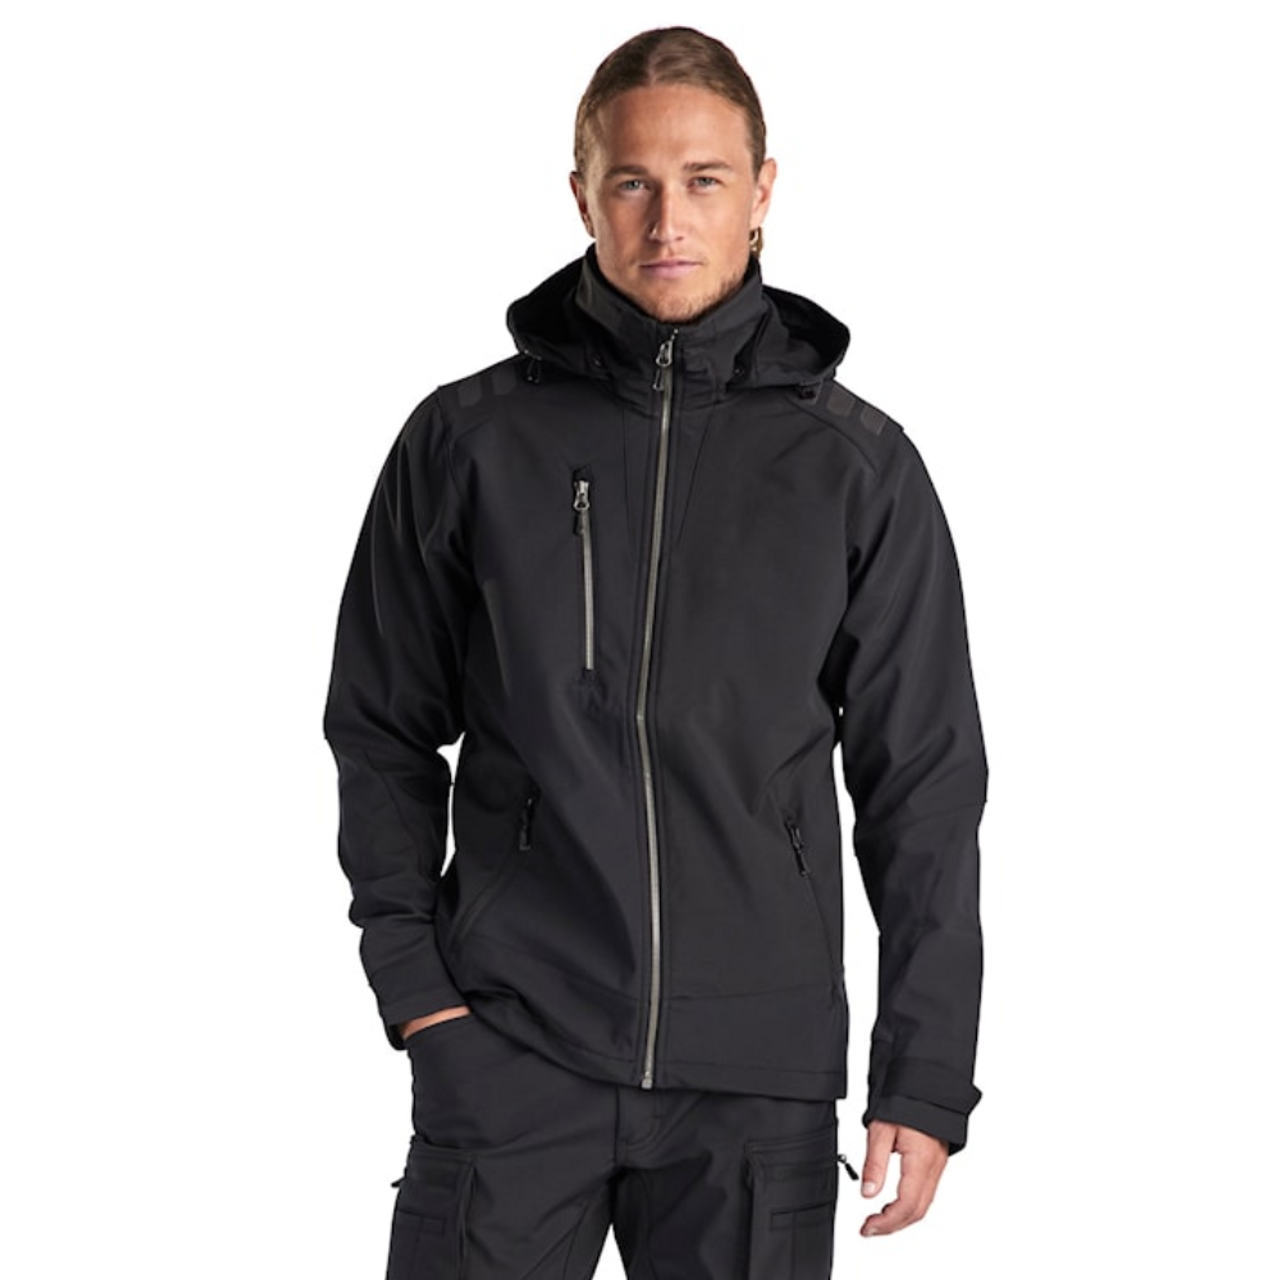 Buy online in Australia and New Zealand a Mens Black Jacket  for Carpenters that are comfortable and durable.